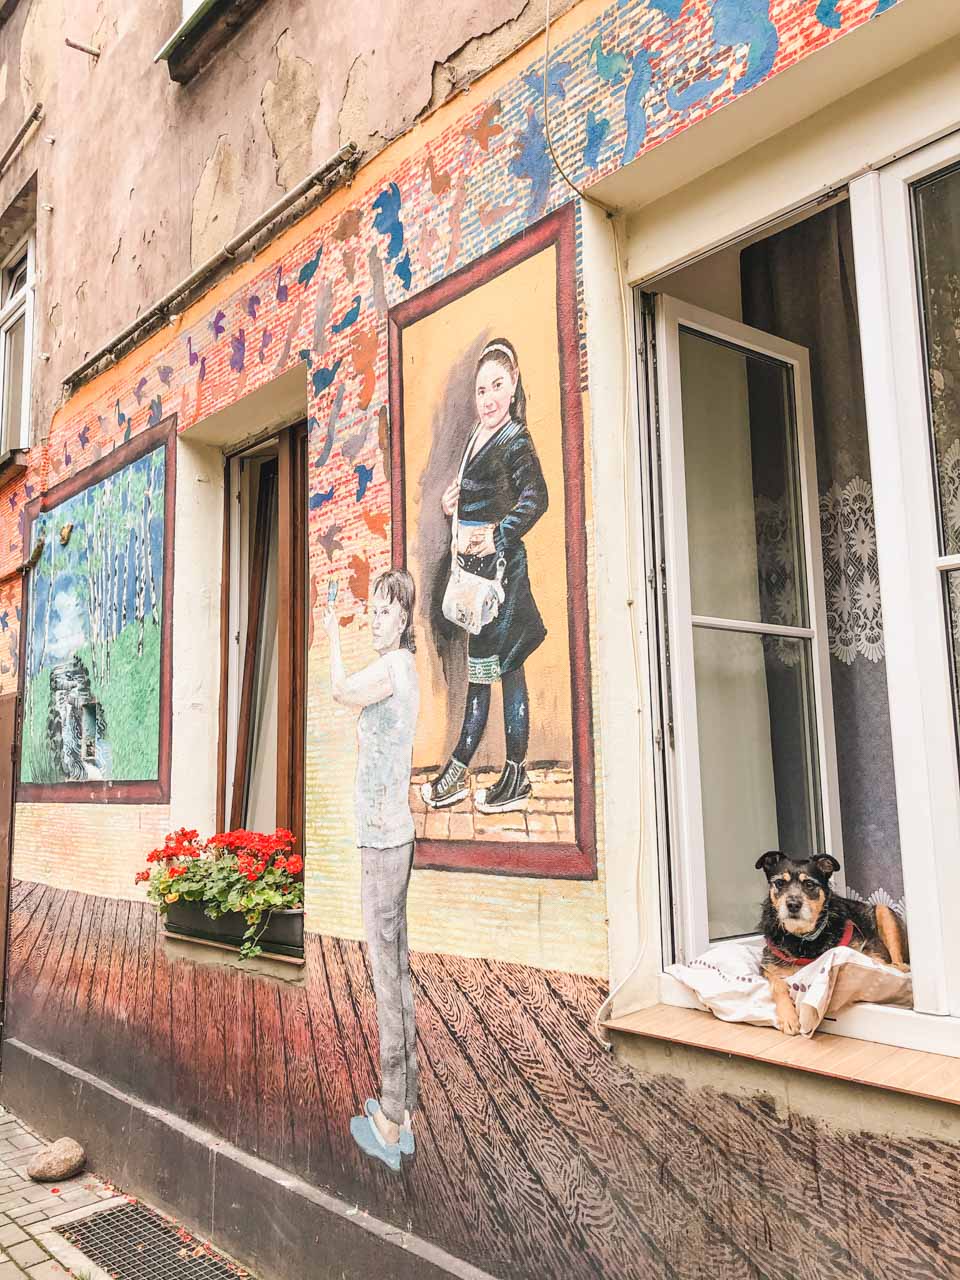 A dog lounging on a windowsill in an old tenement house covered in paintings